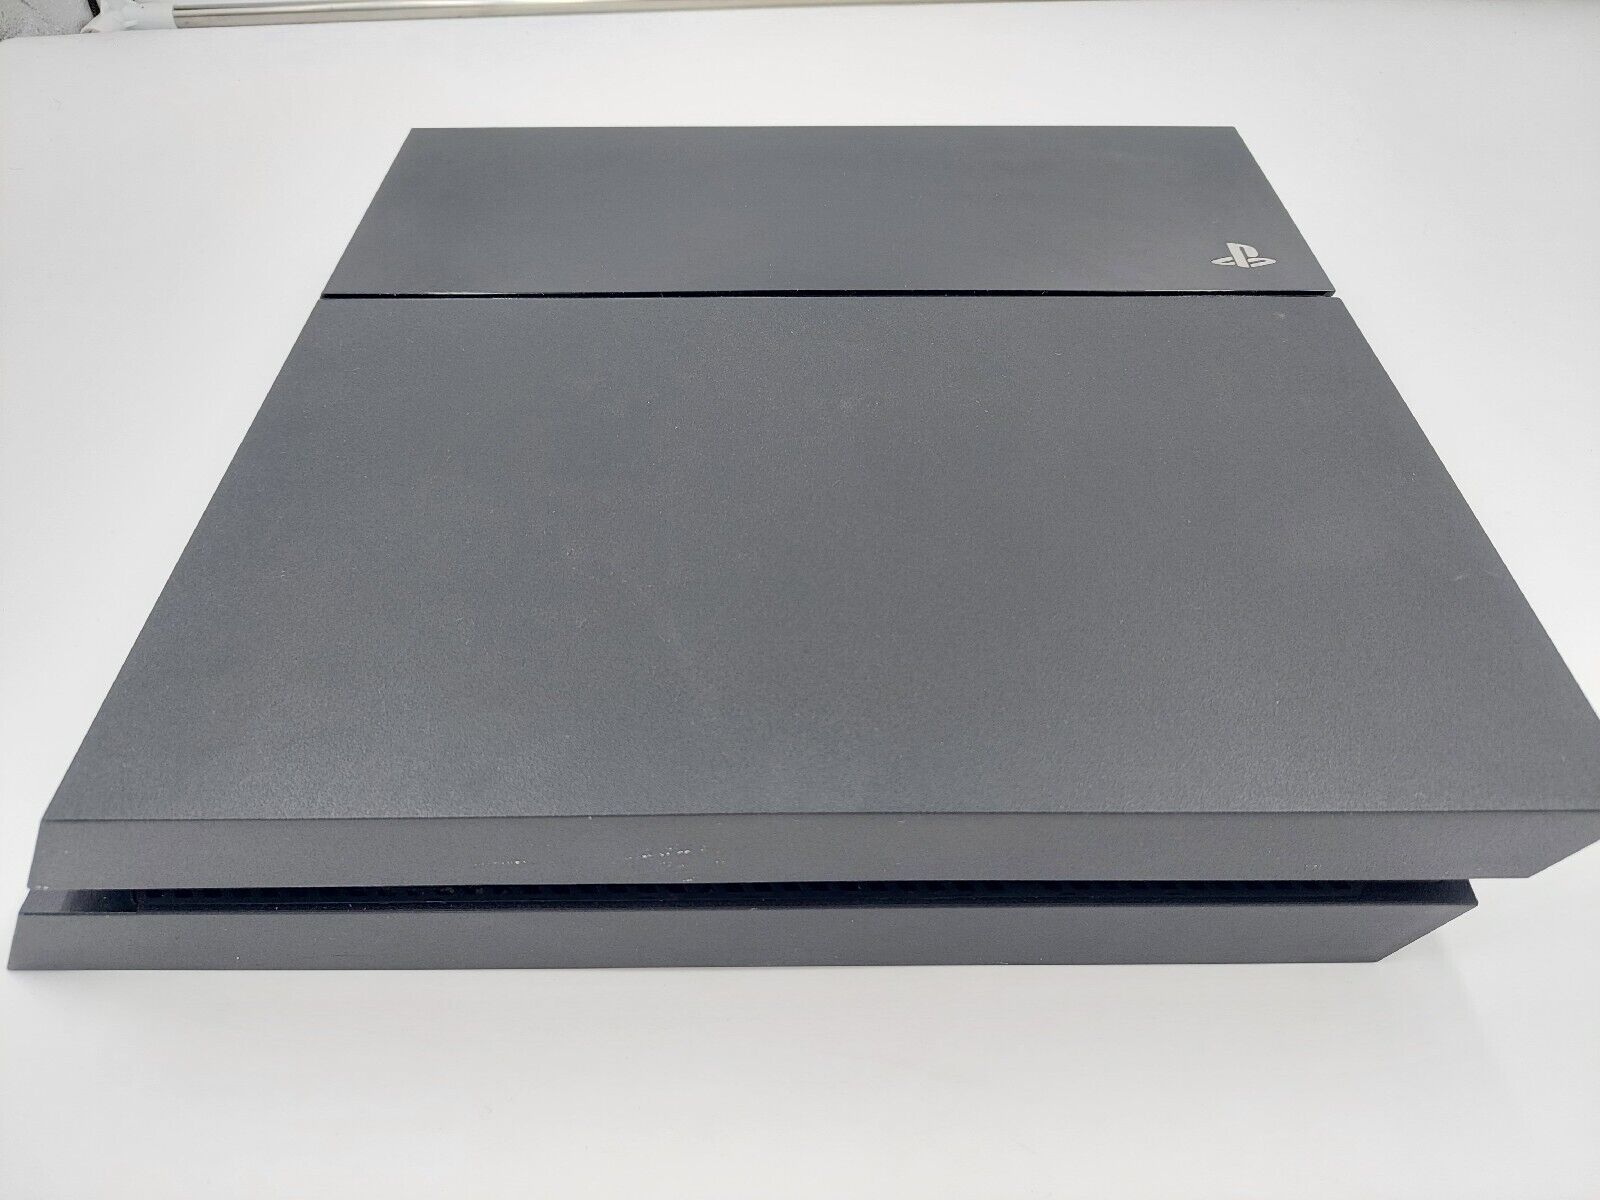 Sony PlayStation 4 500GB Jet Black Console (230267) Broken Manual Eject